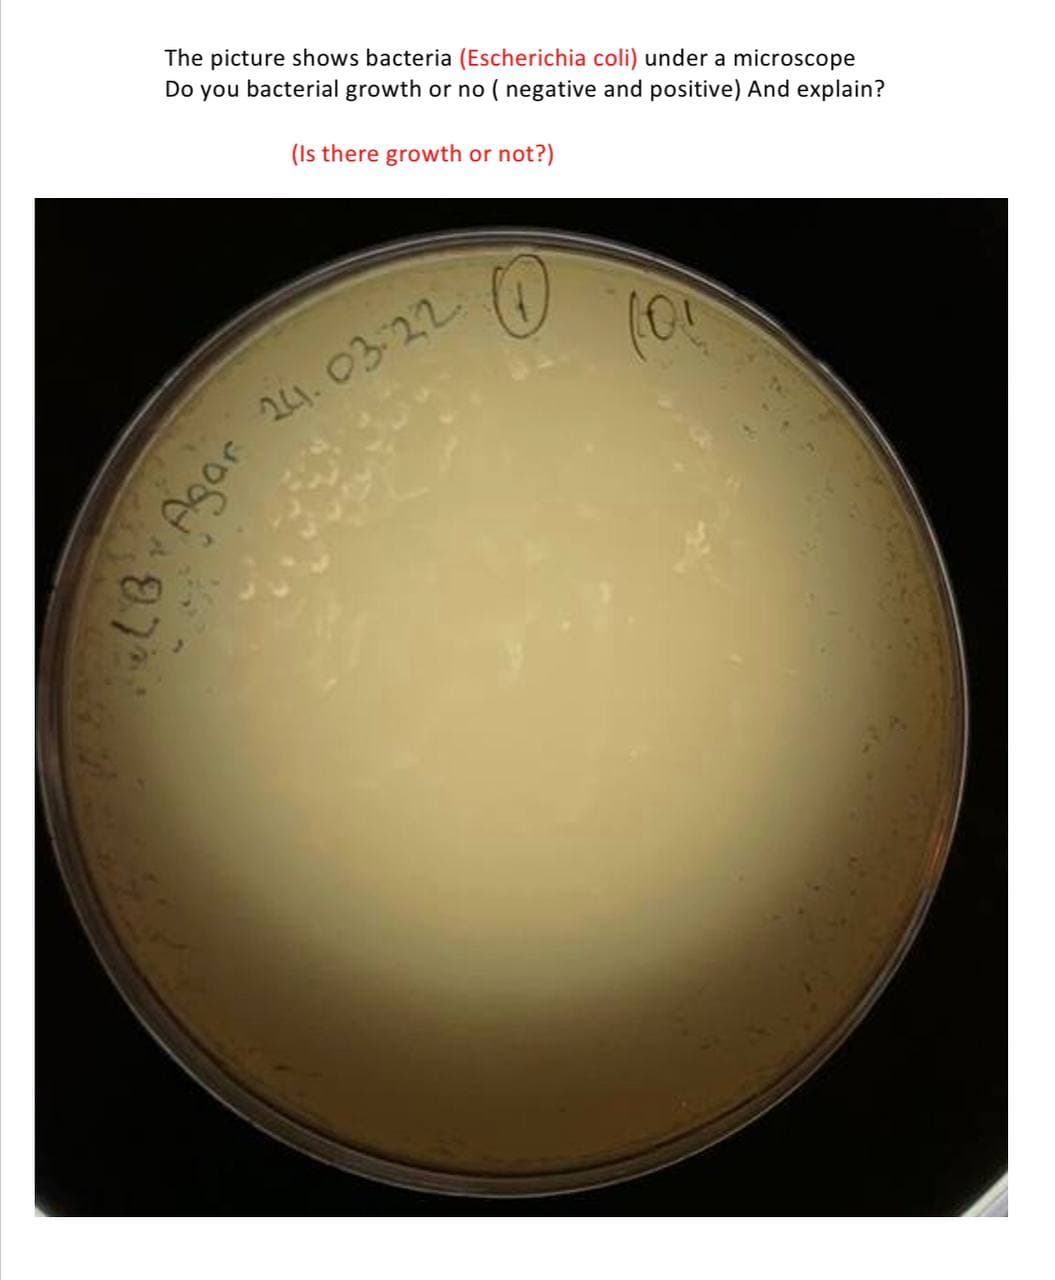 The picture shows bacteria (Escherichia coli) under a microscope
Do you bacterial growth or no ( negative and positive) And explain?
(Is there growth or not?)
24. 03-22
Agar
